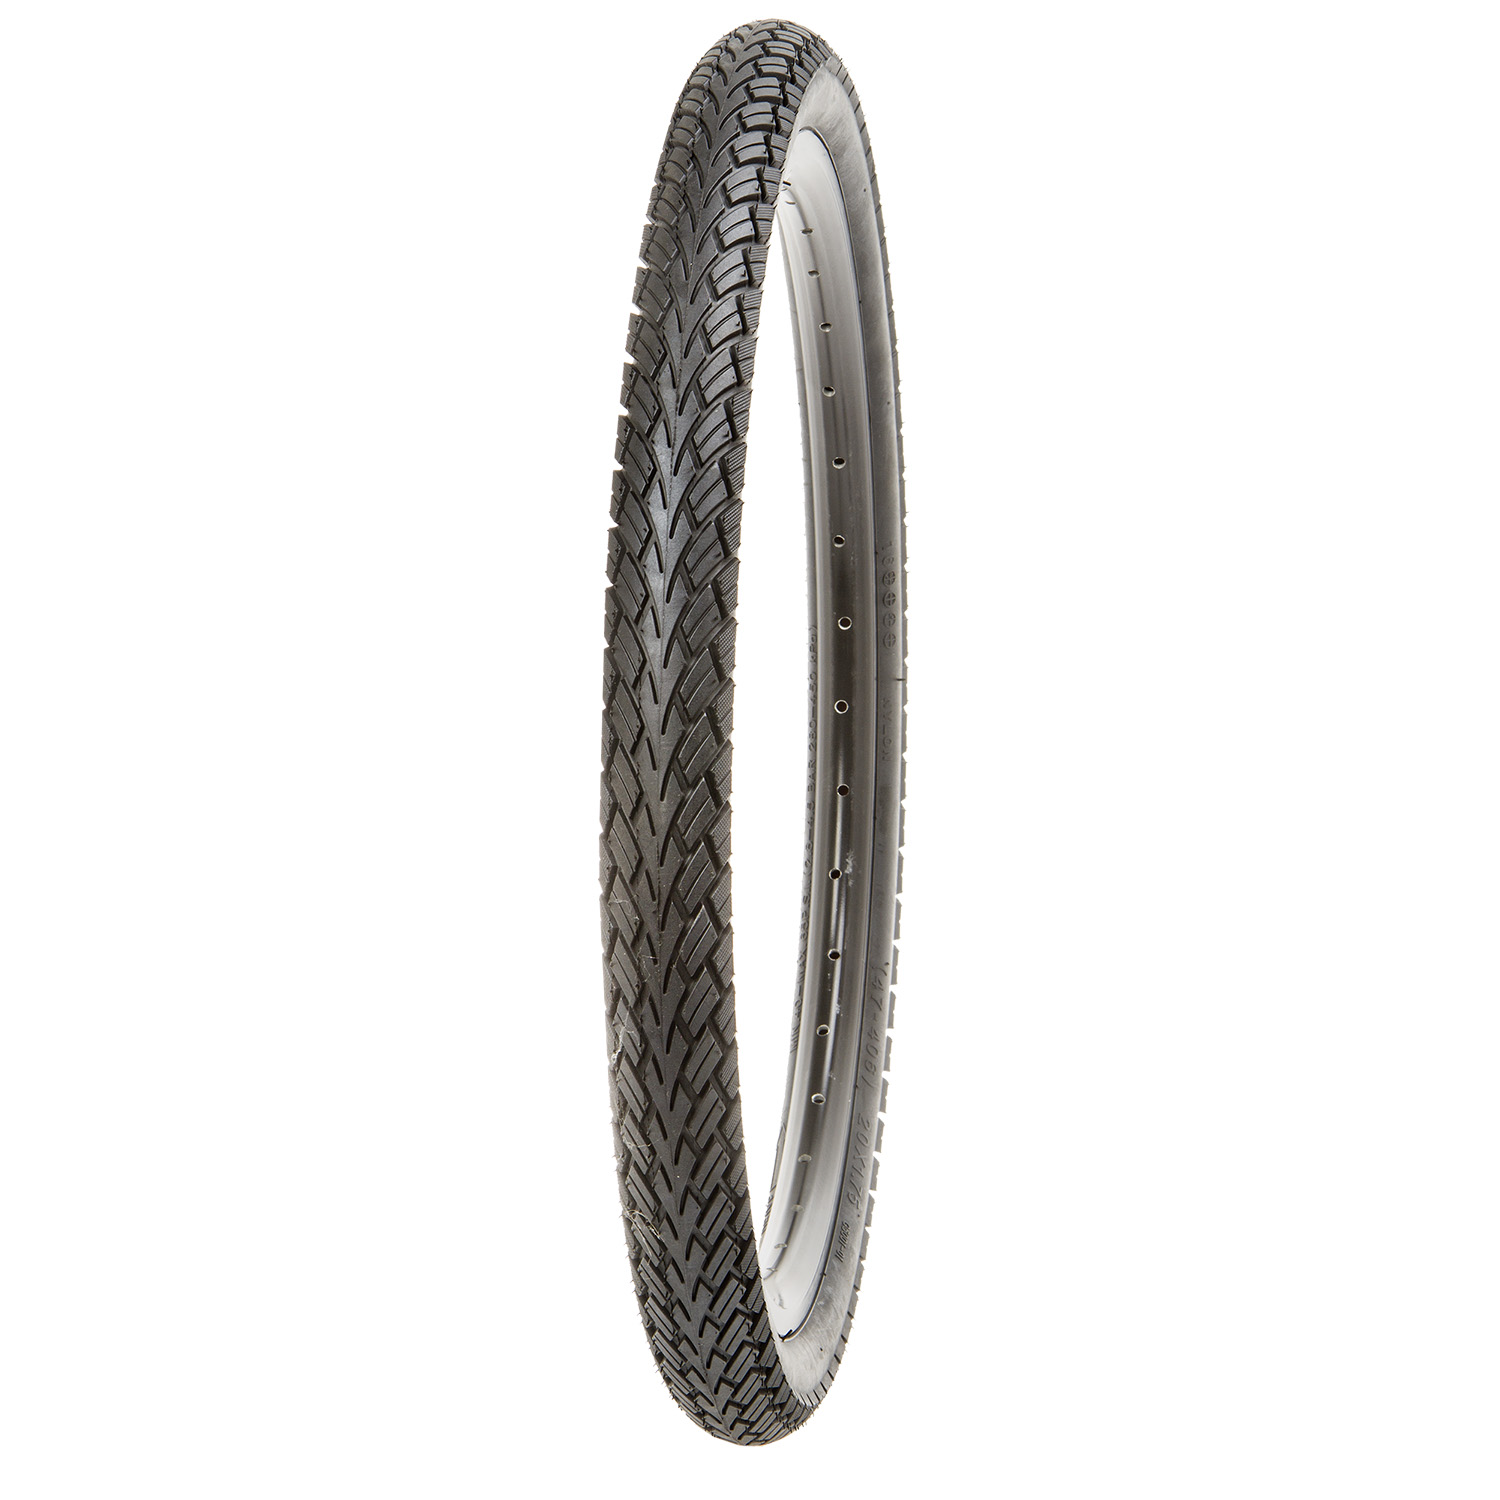 KUJO TIRE, 700x38C One 0 One A – AVAILABLE IN SELECTED BIKE SHOPS